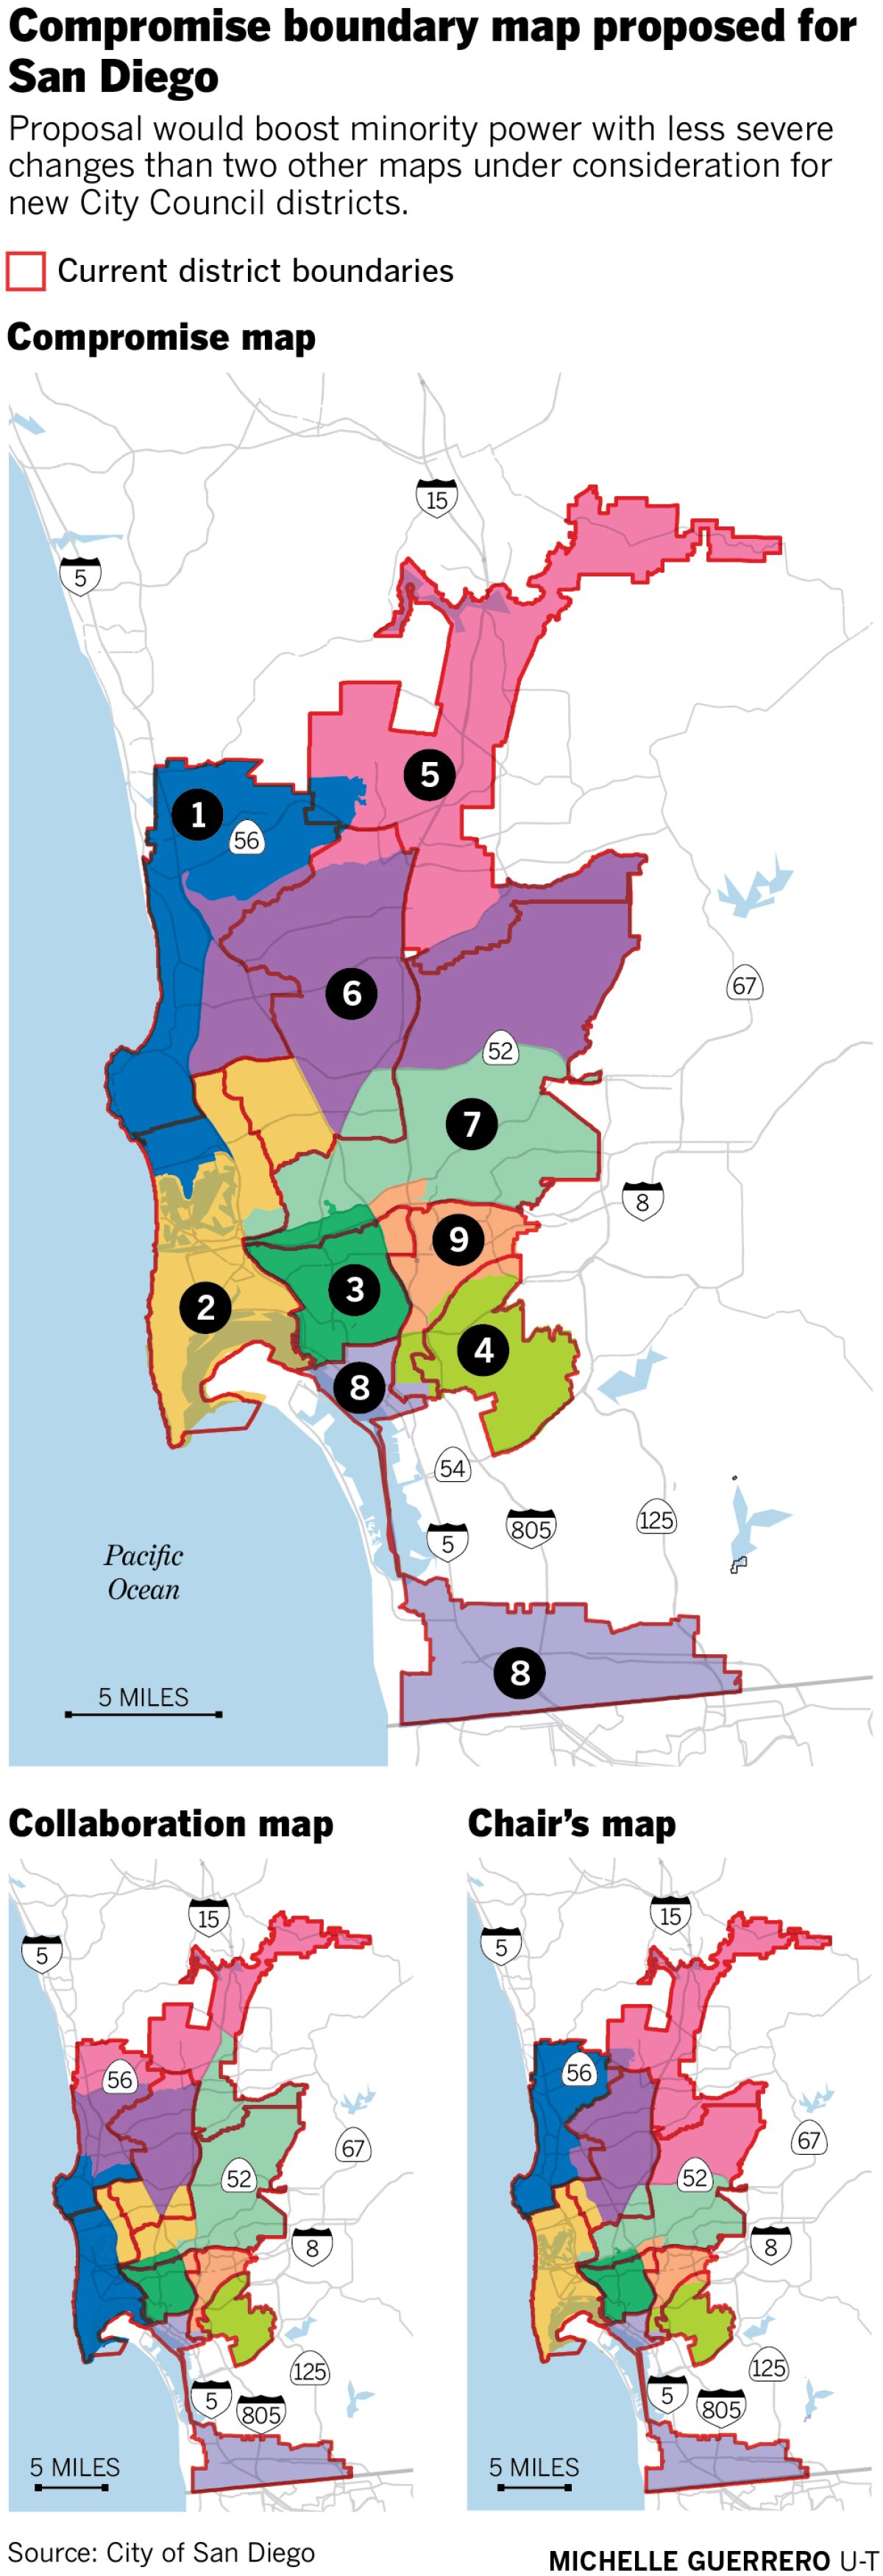 Compromise boundary map proposed for San Diego